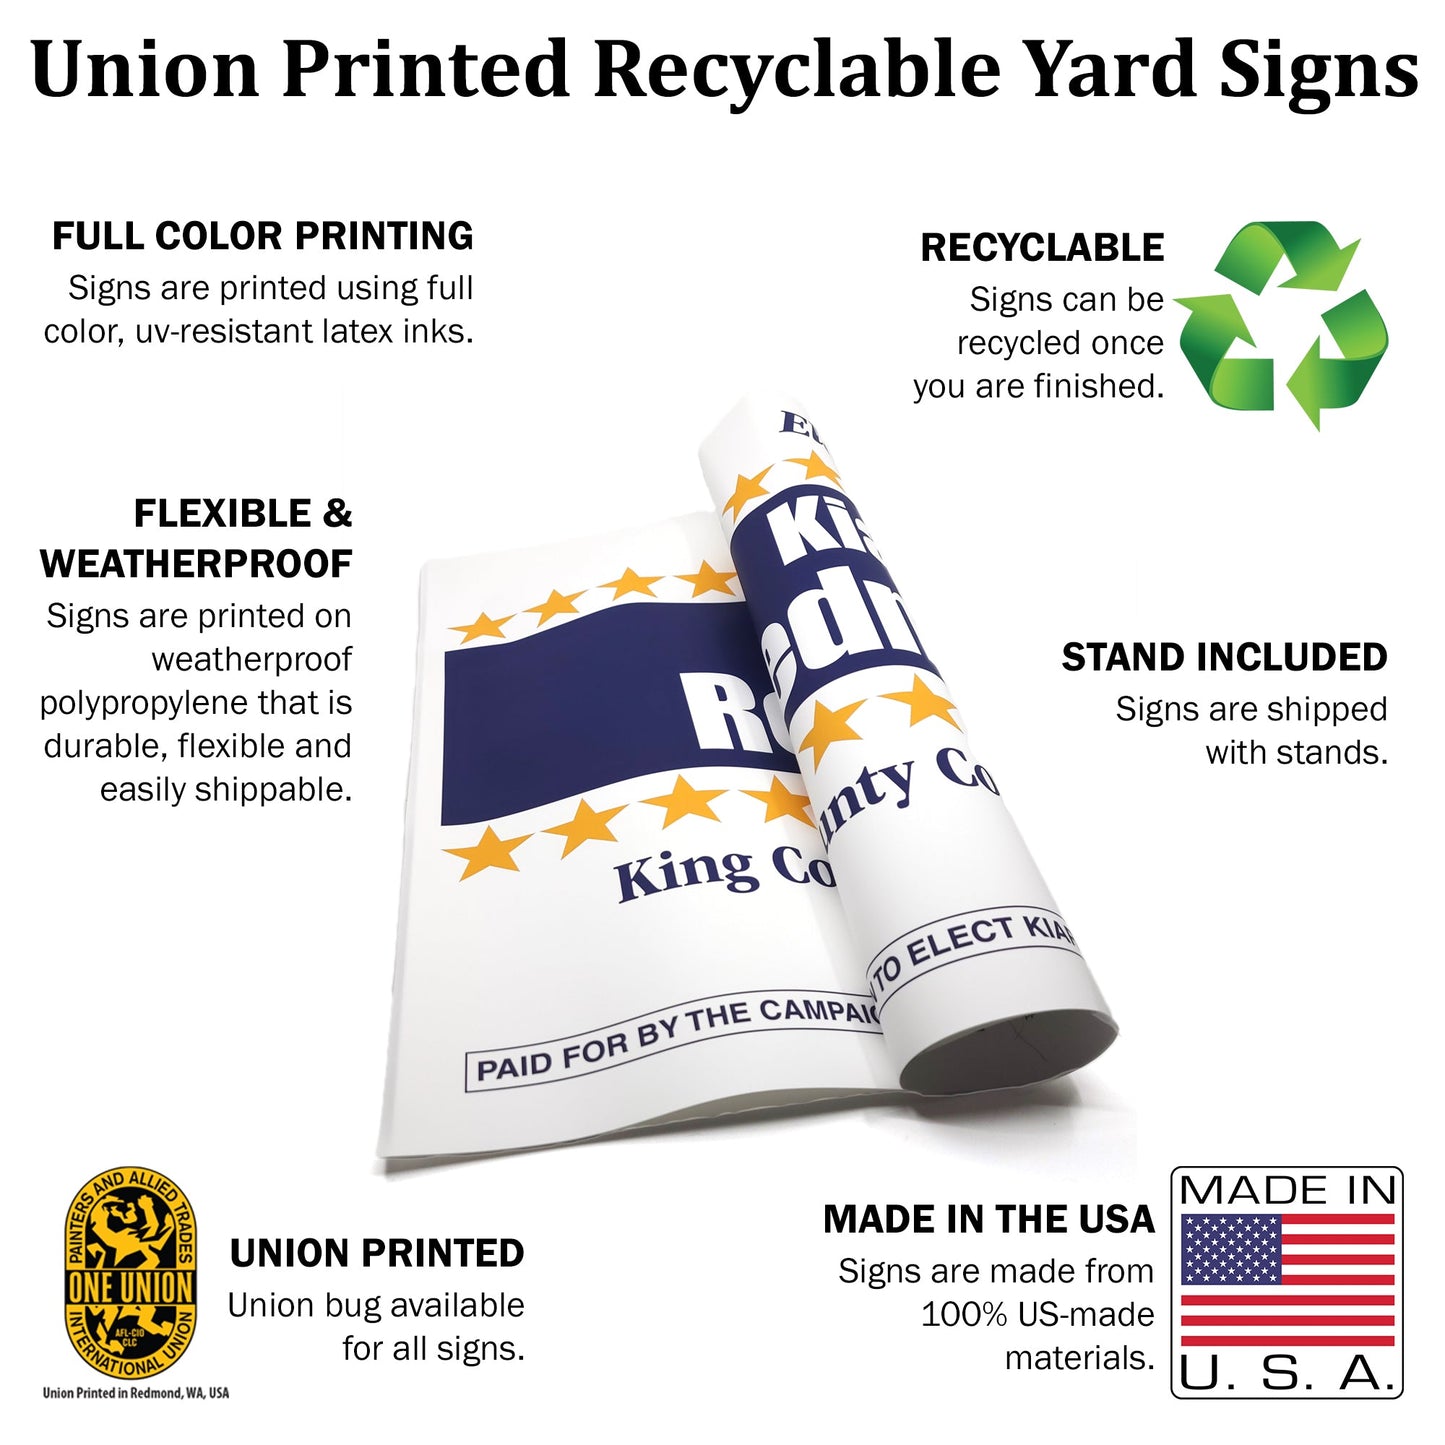 MerchBlue Union-Printed Yard sign - 24x18 - Custom Image - Recyclable - Made in the USA